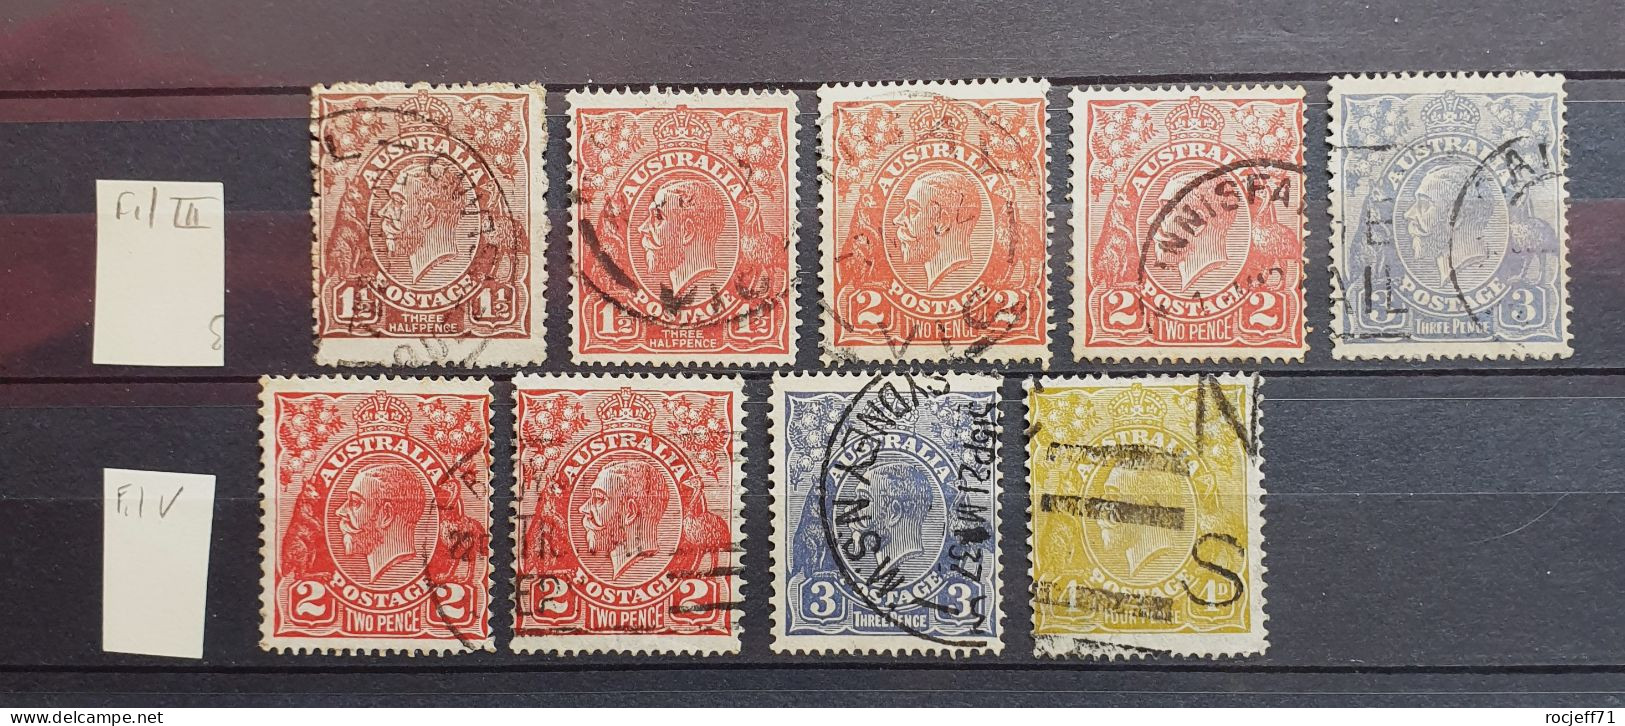 11 - 23  // Australia - Australie - Lot De Timbres - Old Stamps - Used Stamps